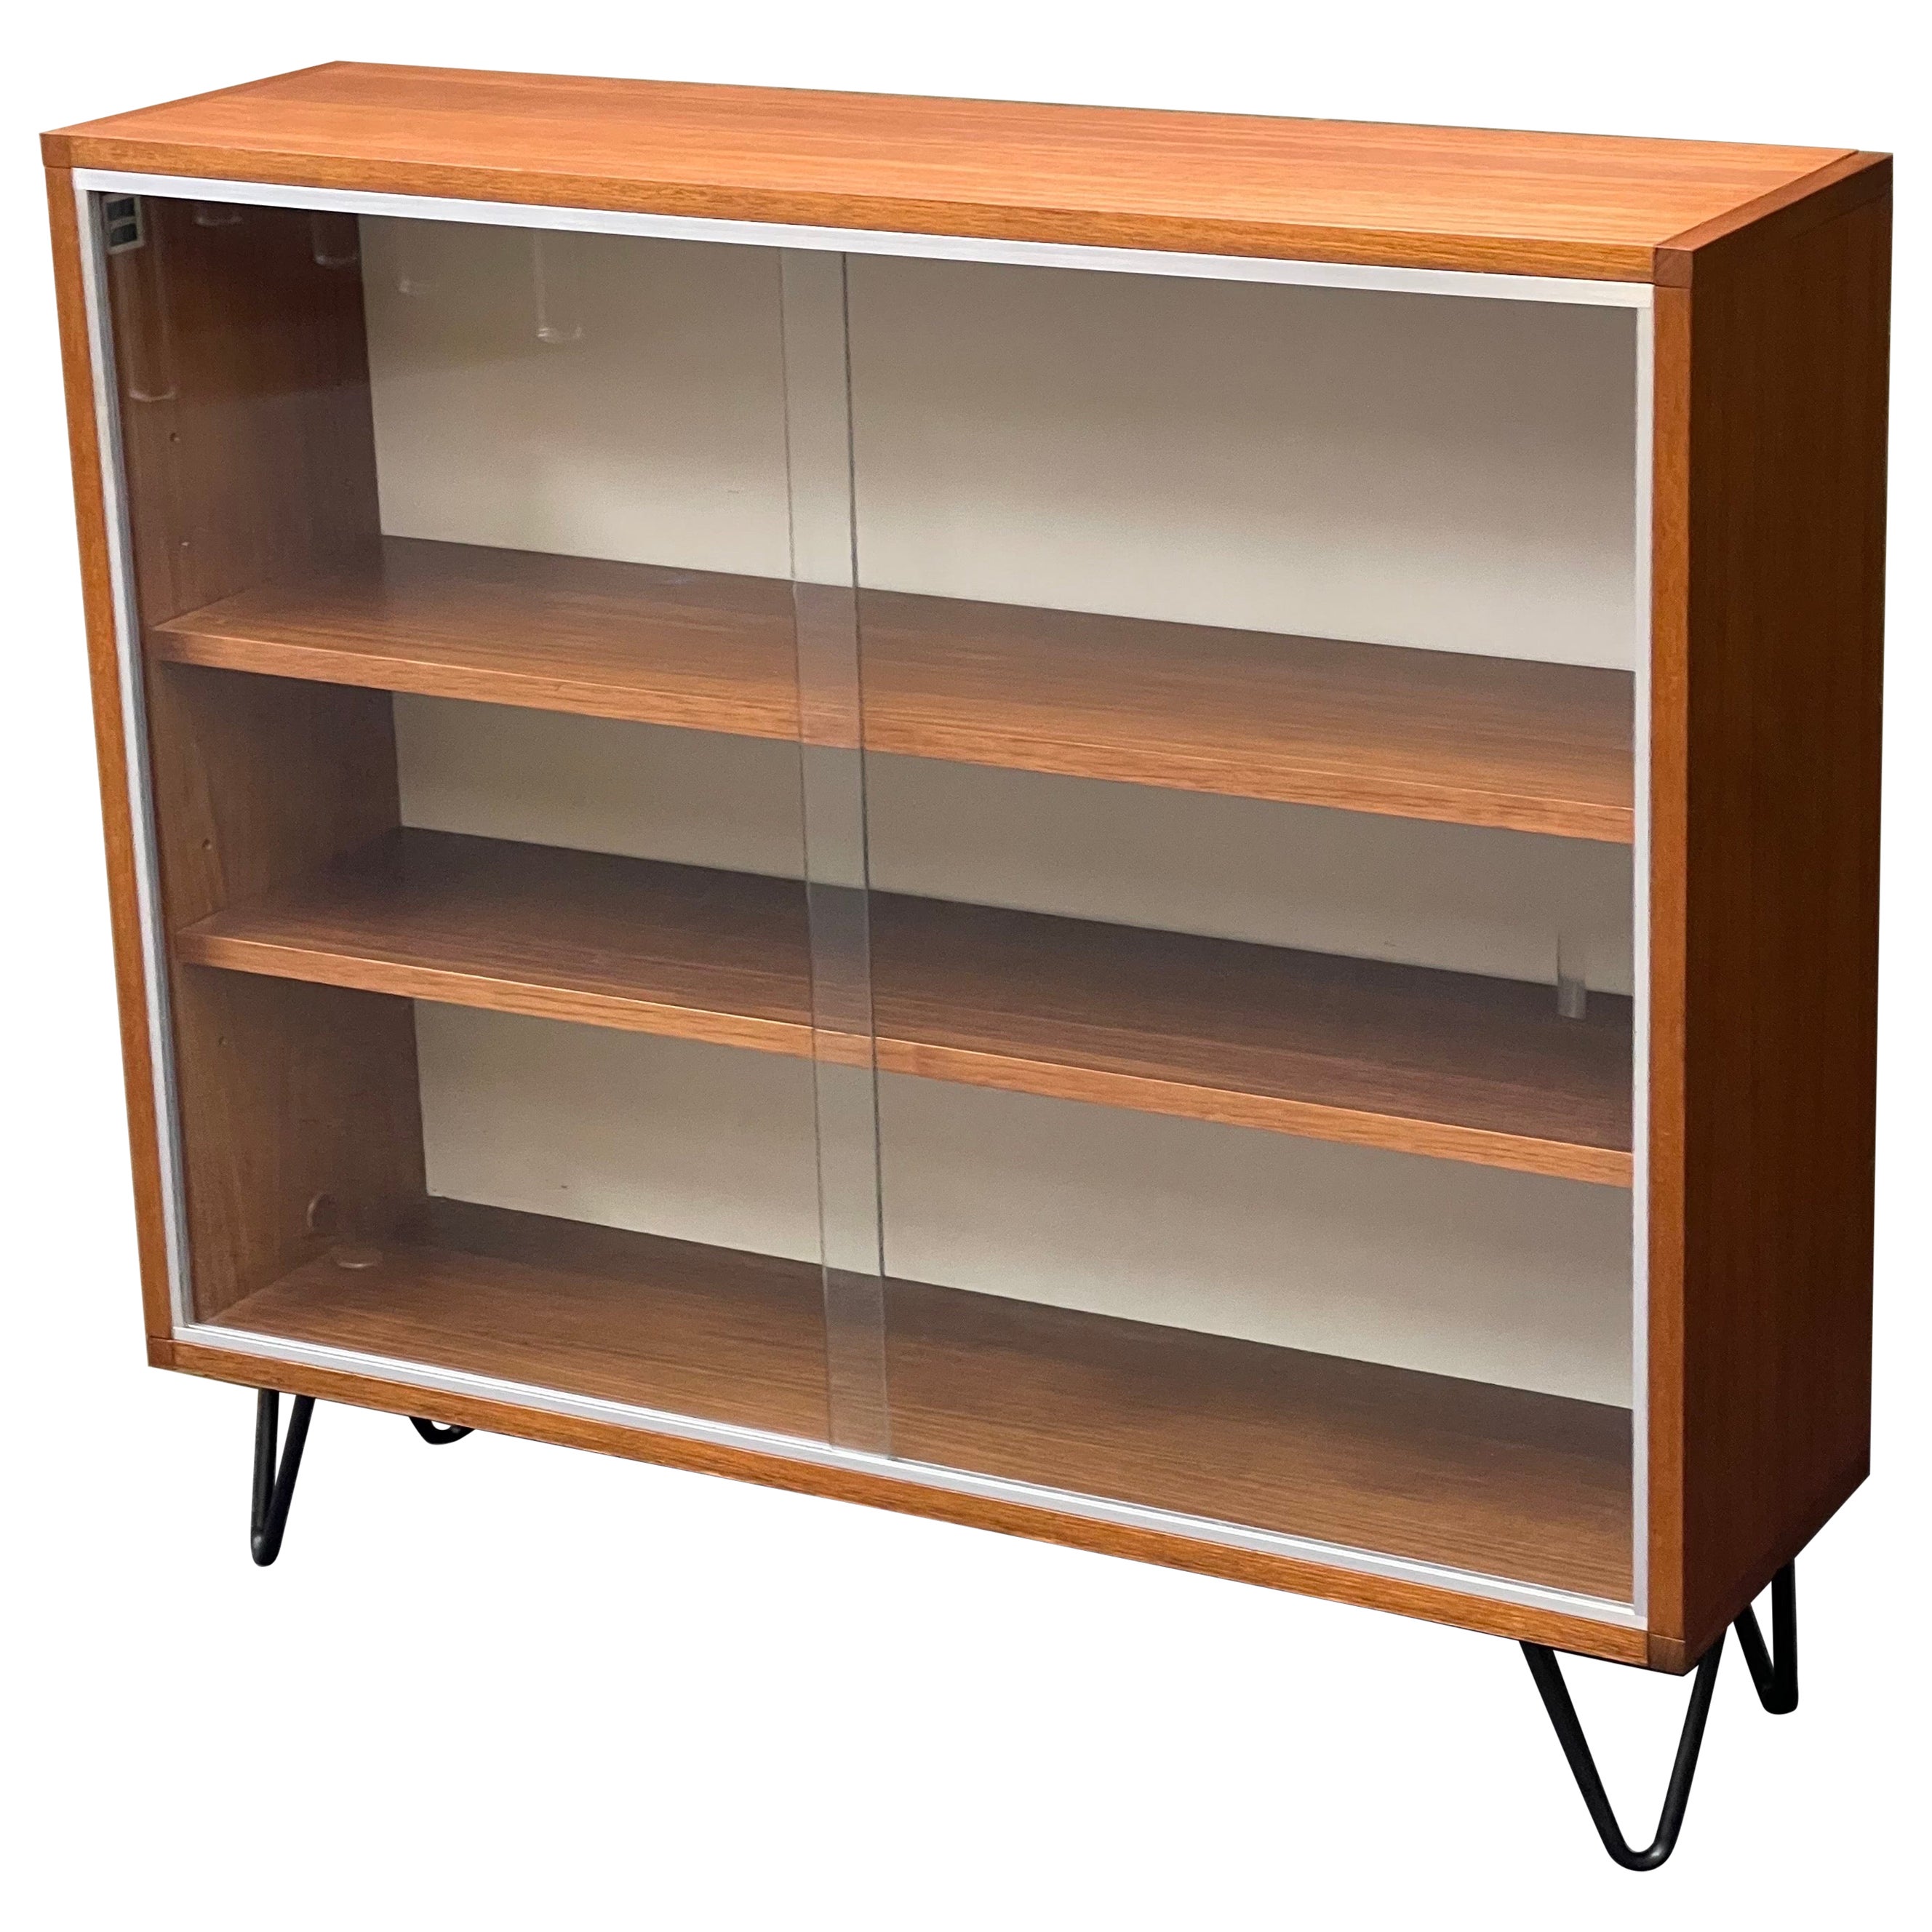 Elegant Danish Modern Bookcase / Cabinet with Glass Doors and Hairpin Legs